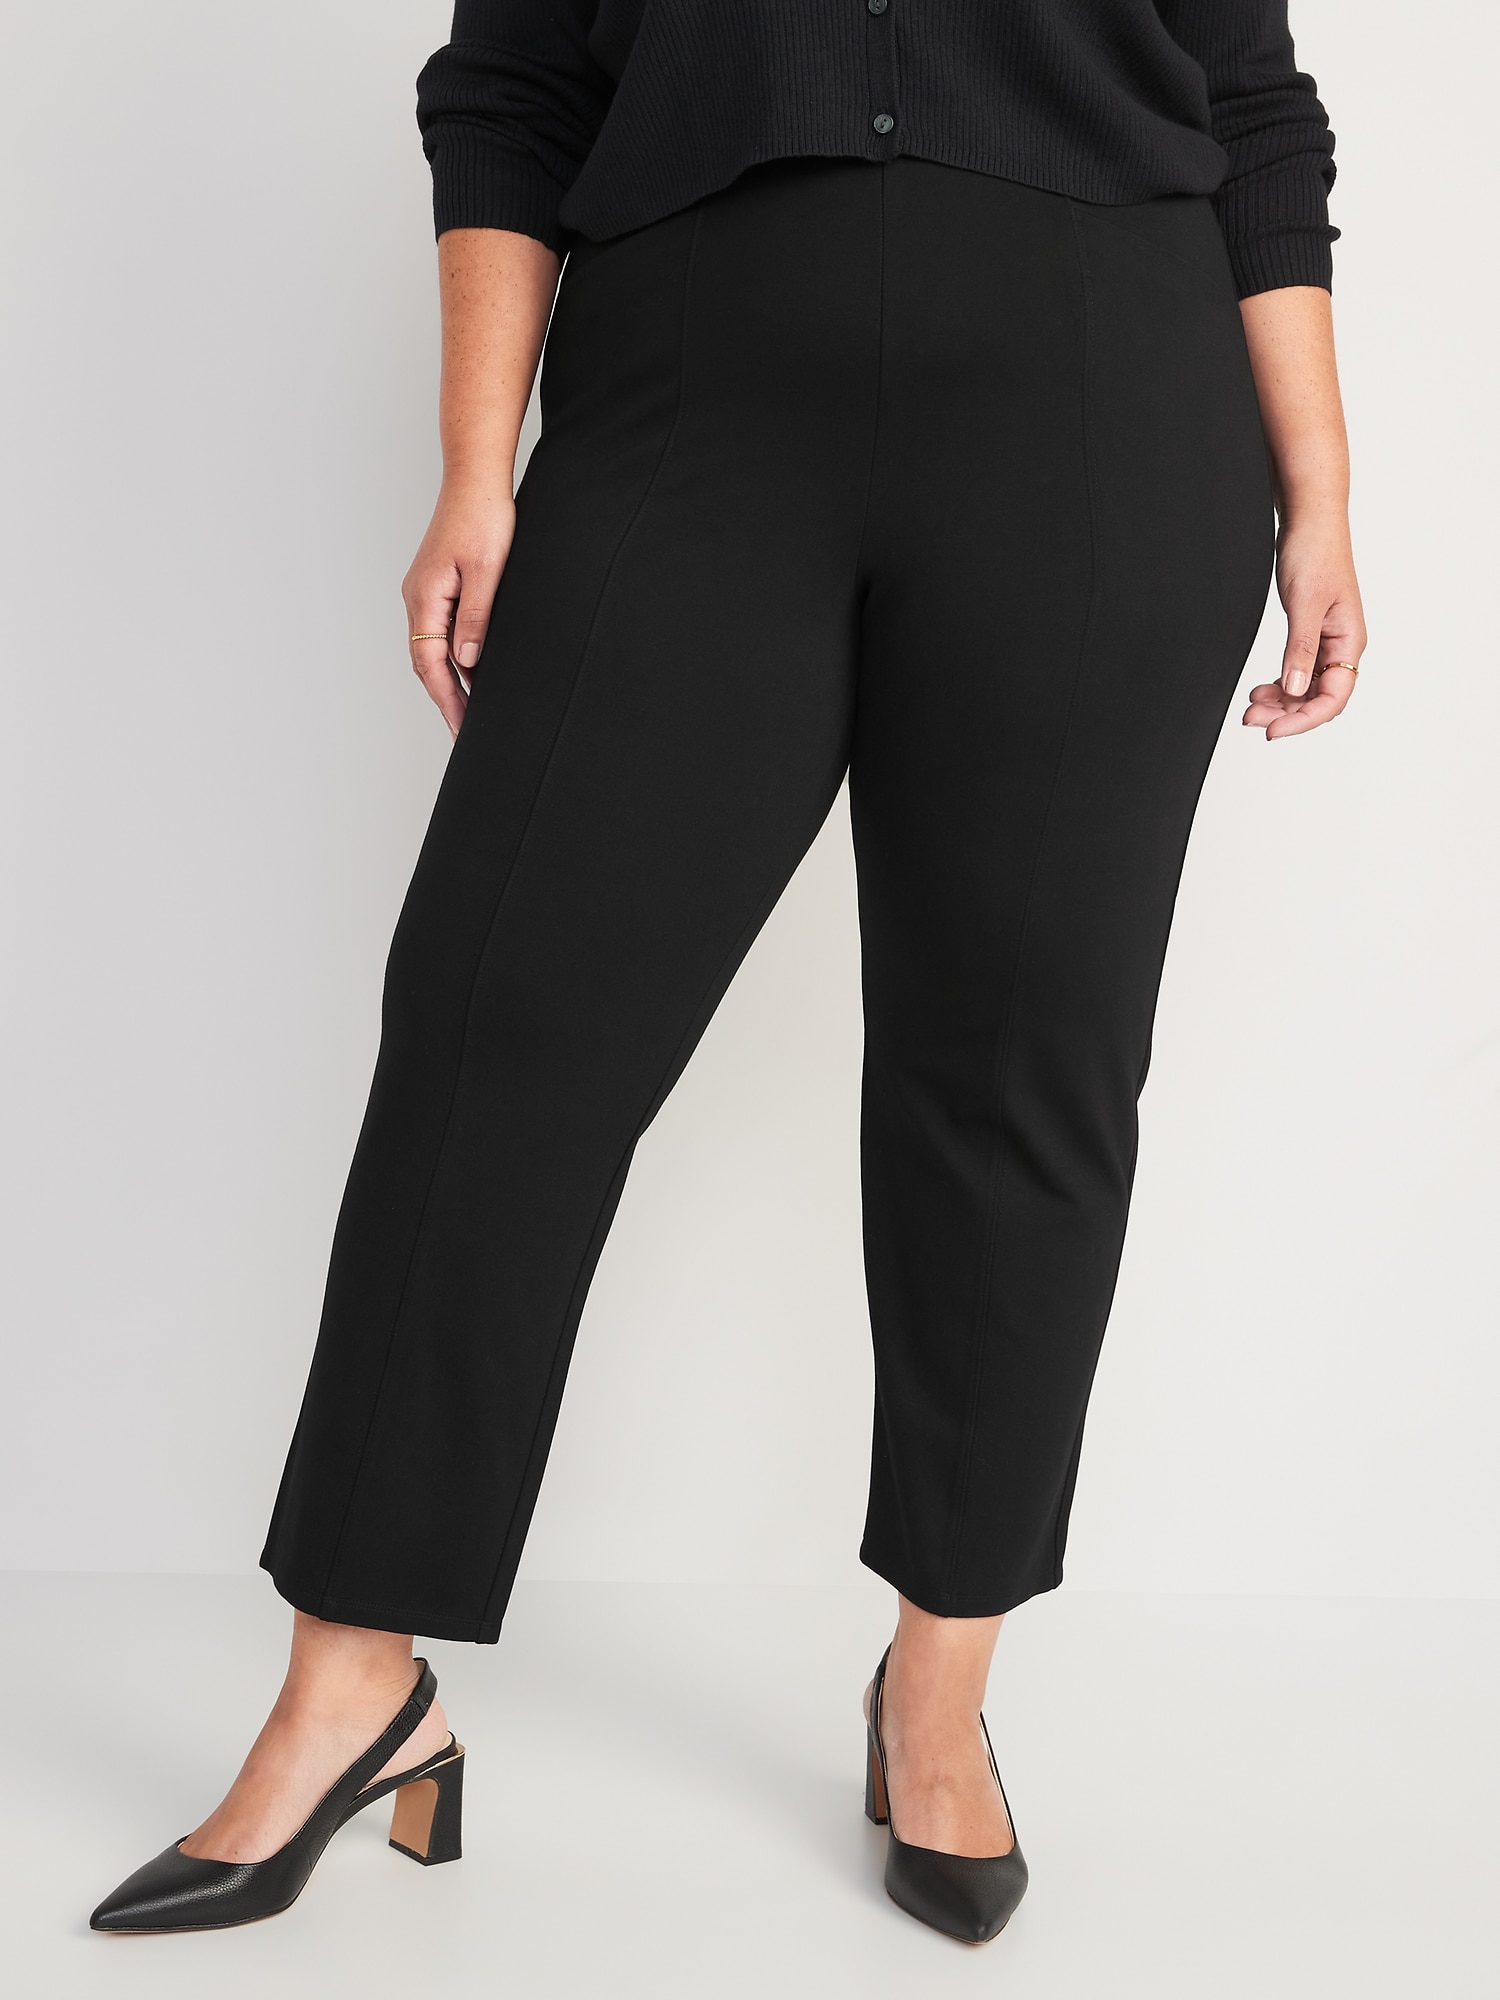 highly recommend these uniqlo ankle pants if you're looking for work p